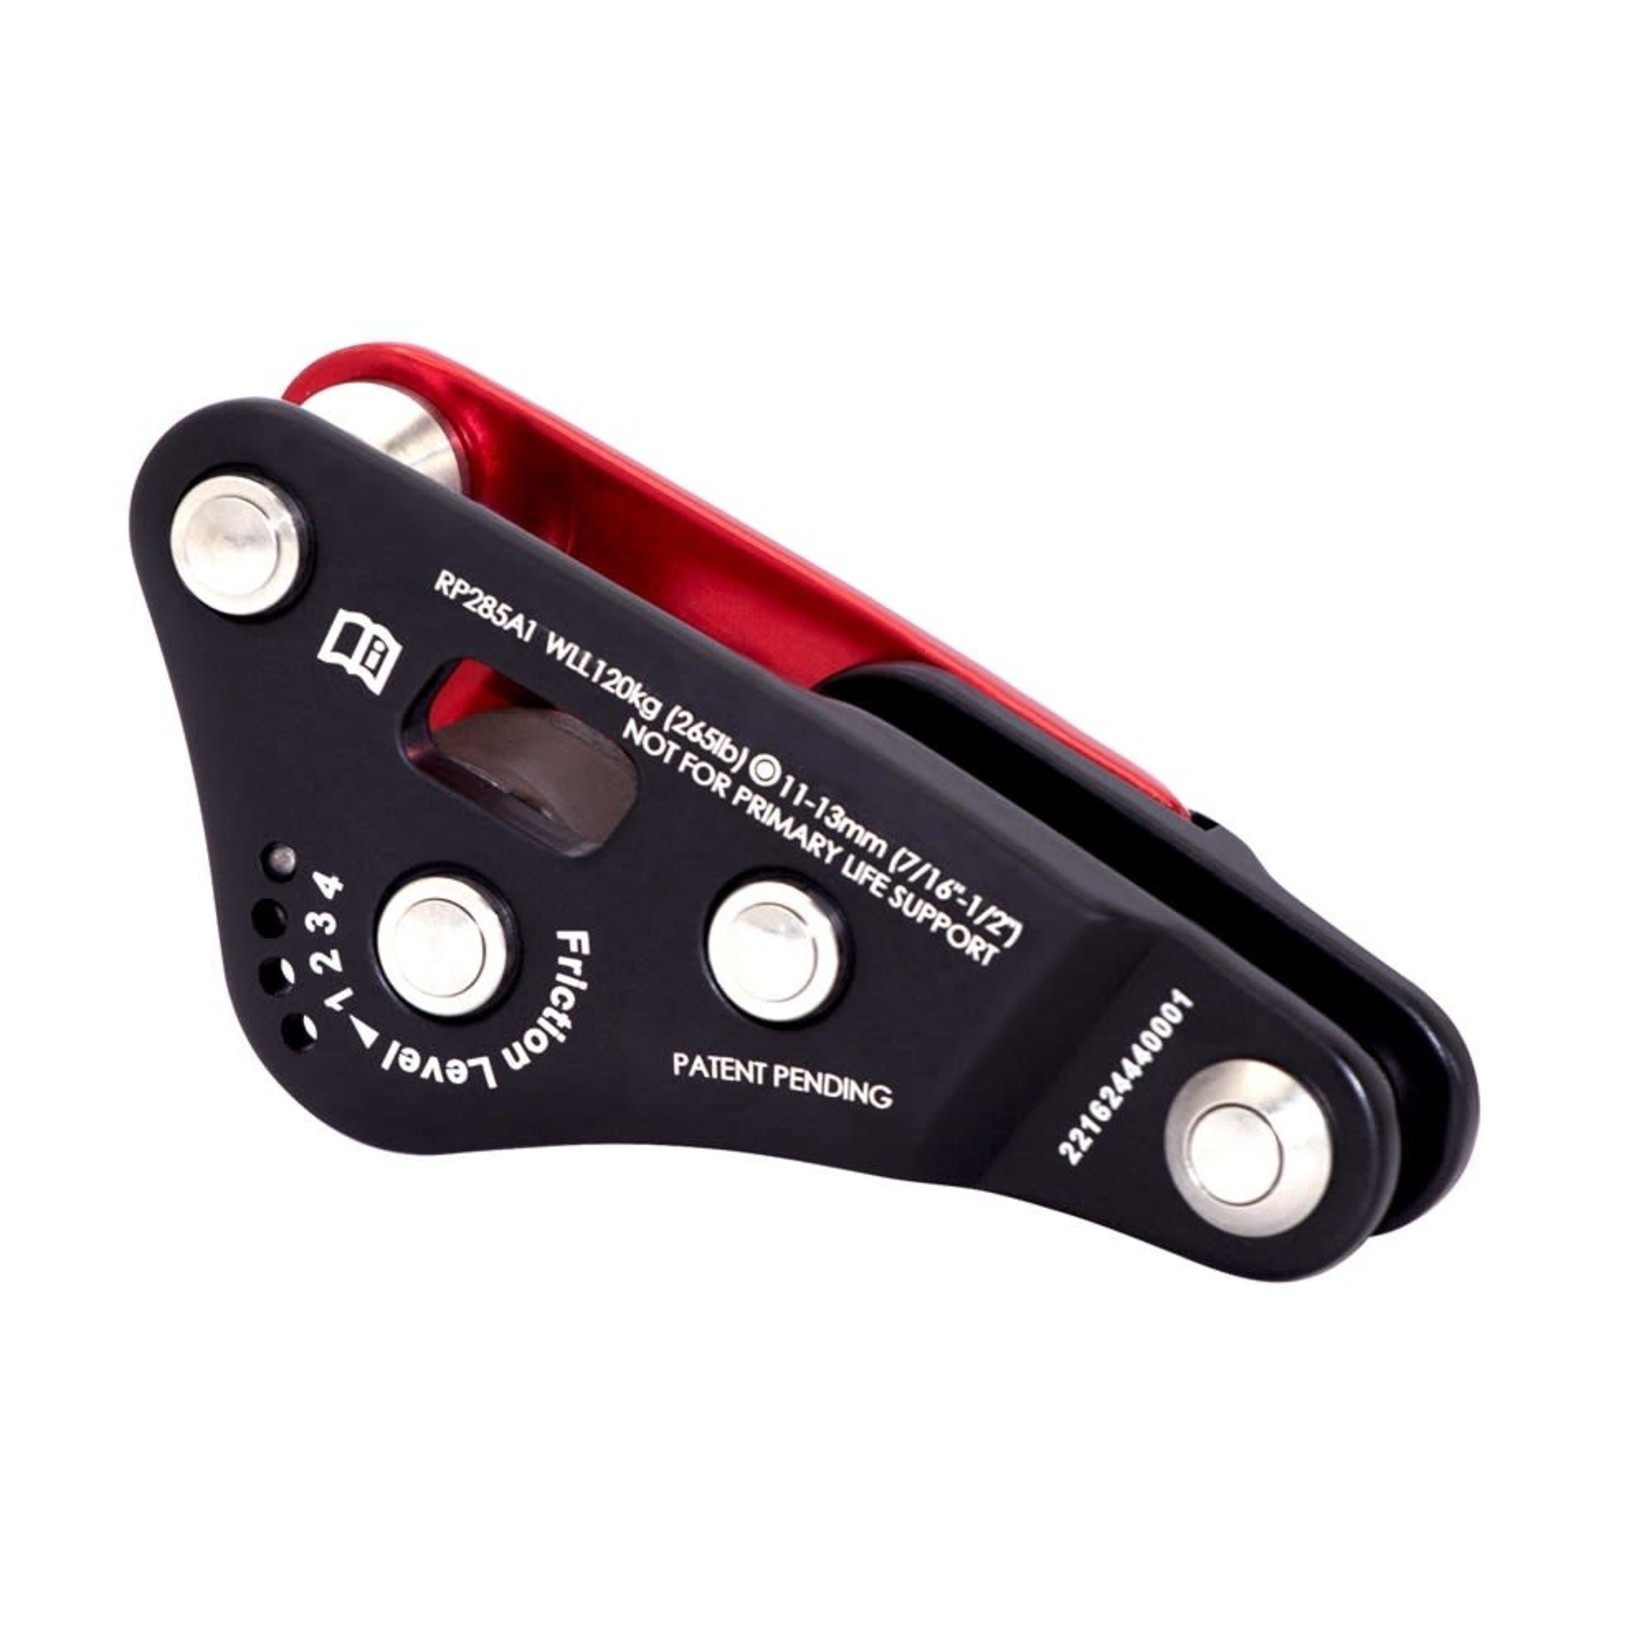 ISC APEX Rope Wrench, Black & Red. NOT for PPE